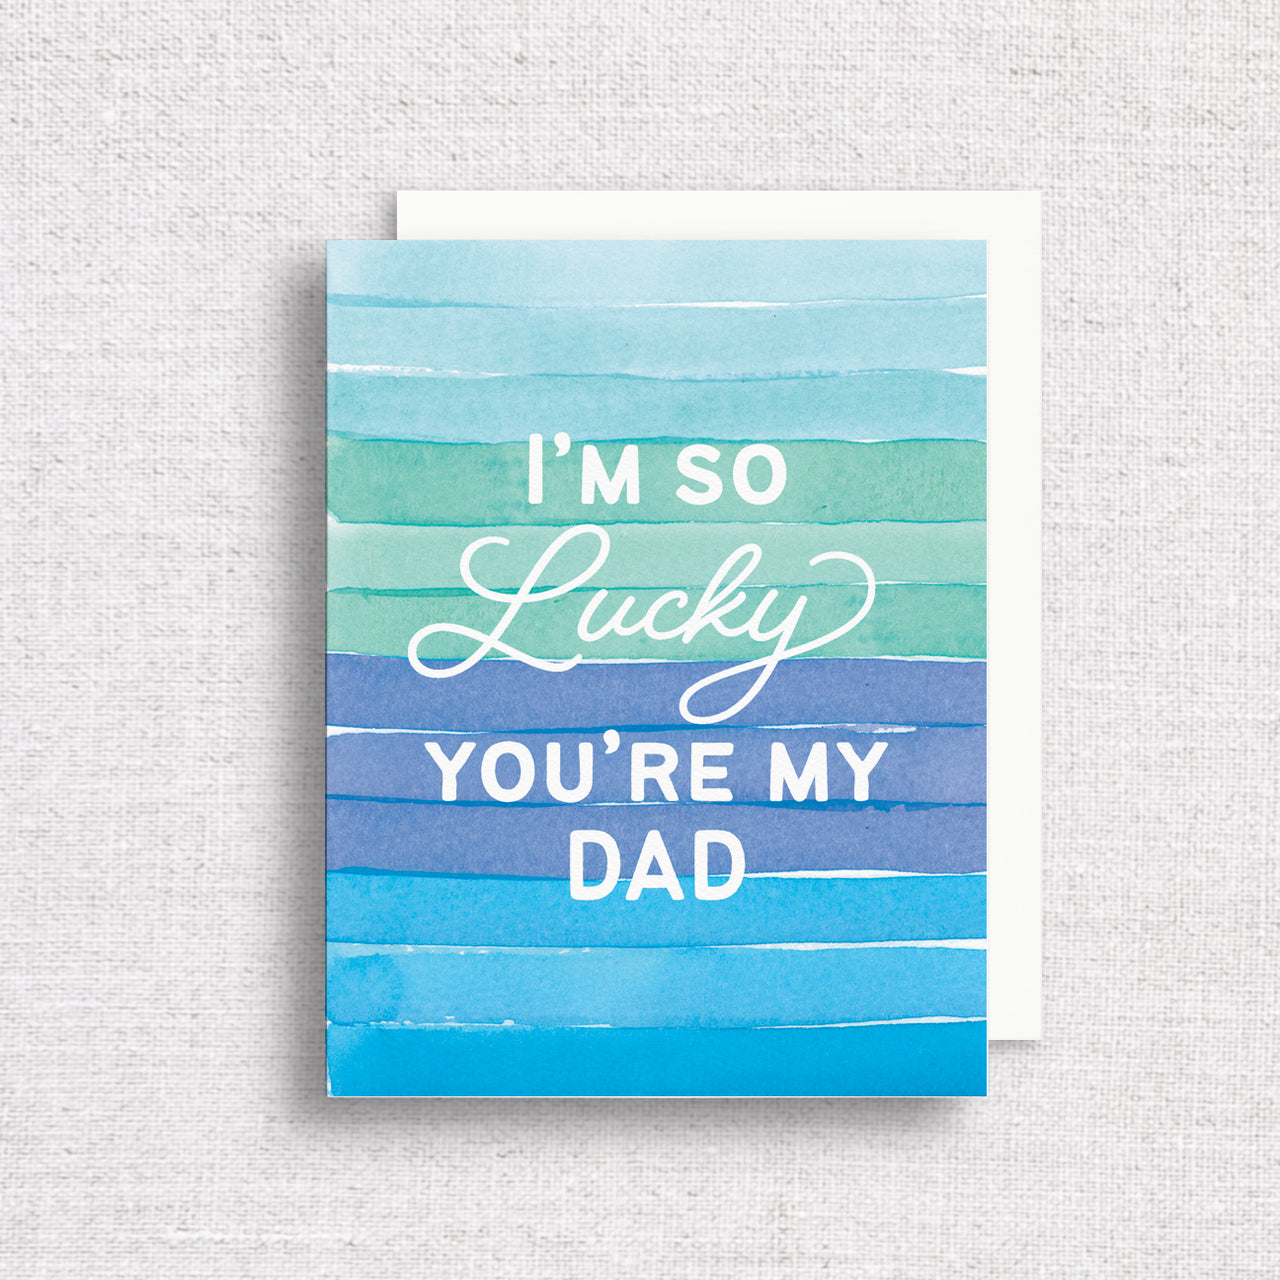 I'm So Lucky You're My Dad Greeting Card by Gert & Co